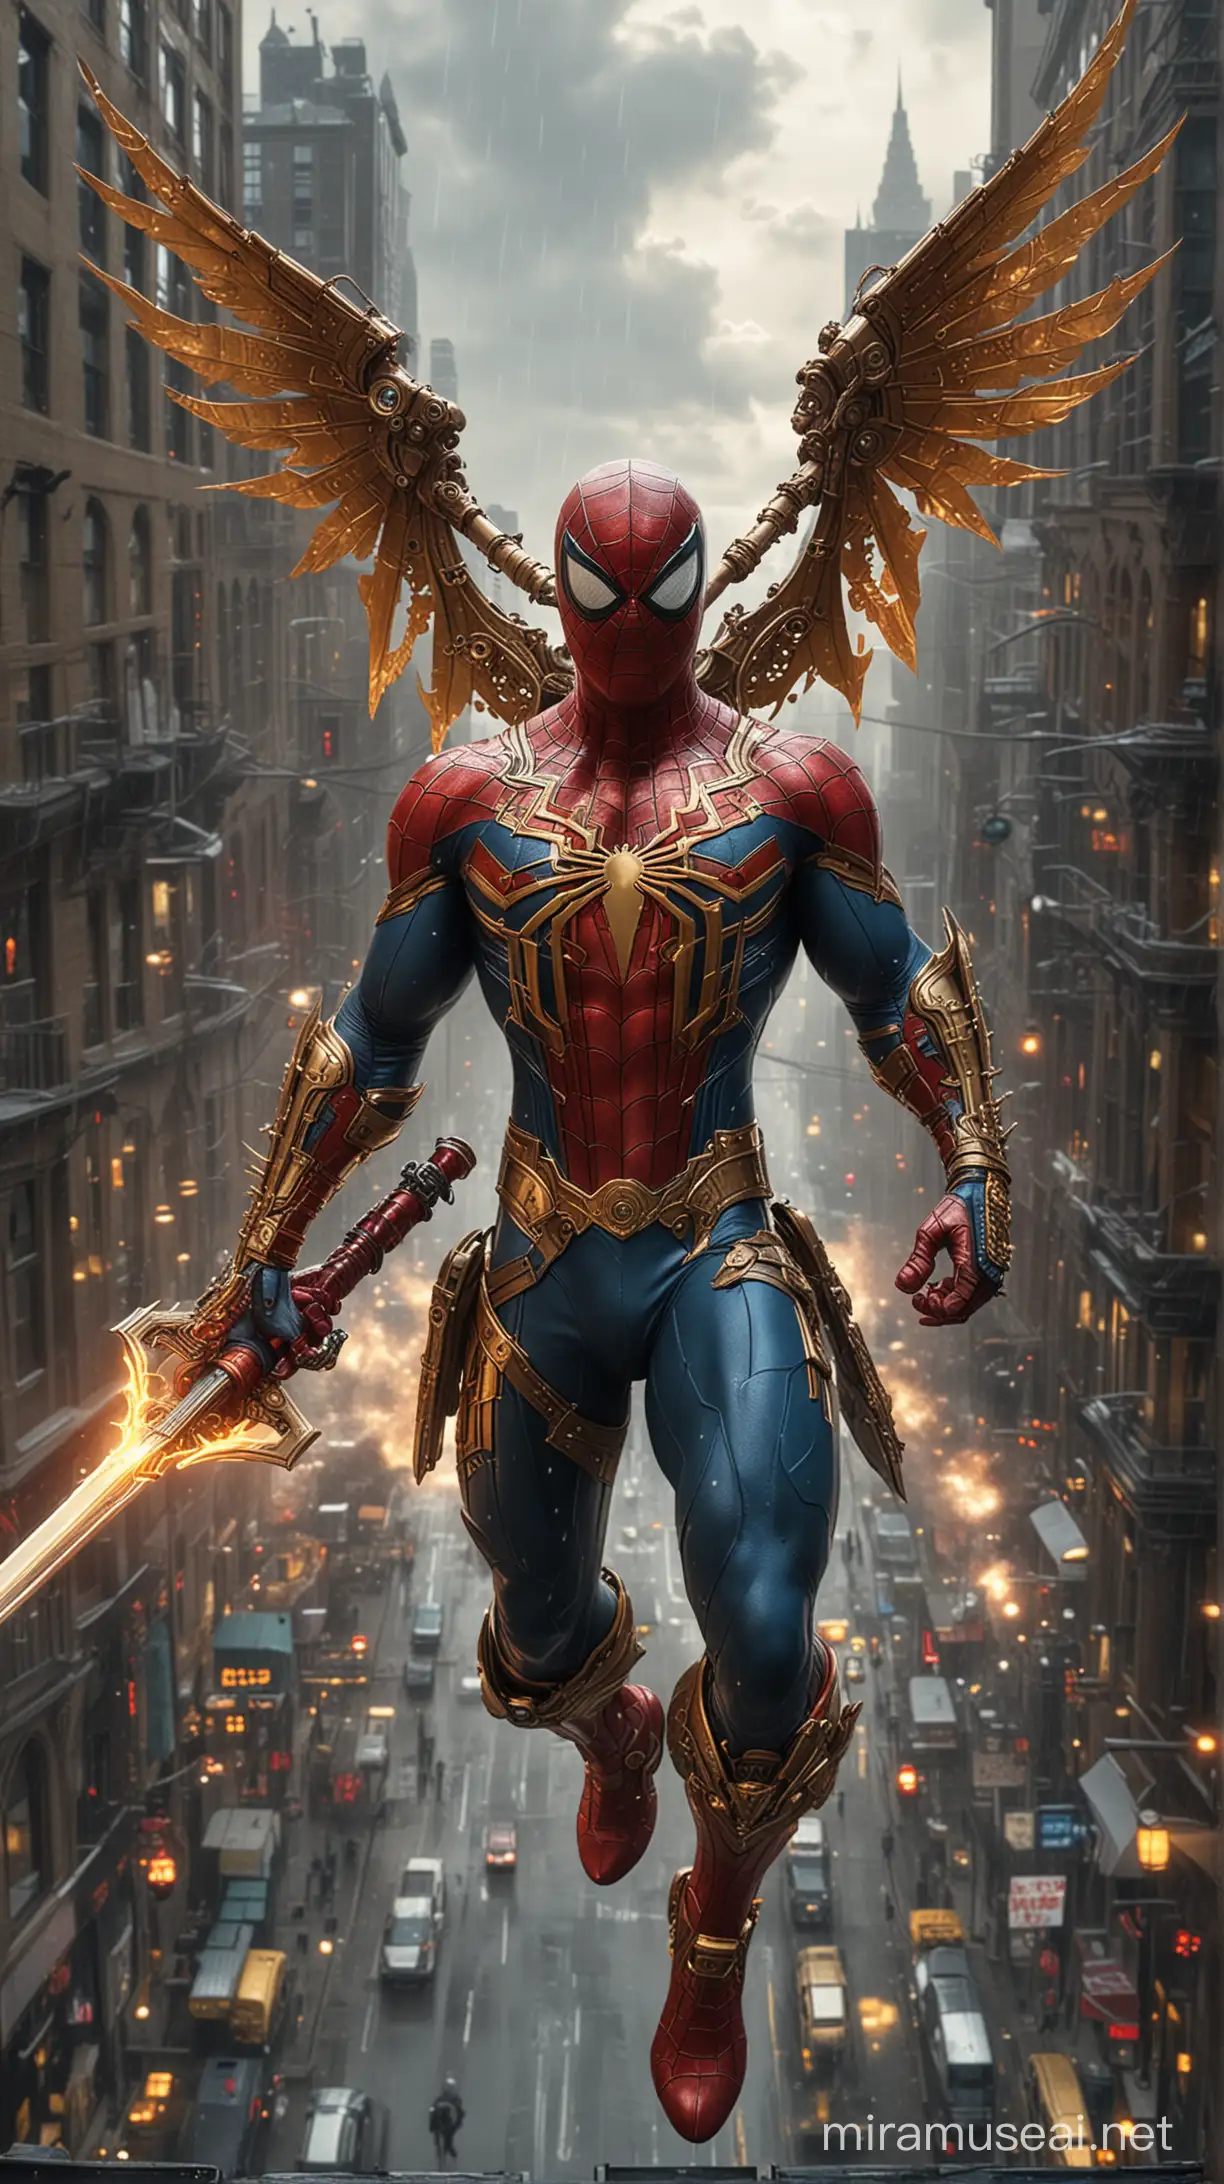 top-down view/full body view], buff spiderman in red, blue and gold ornate steampunk armor, and large flaming mechanical wings, holding a glowing sword, flying high above a busy city, fractals, rainy weather, grey clouds, city lights, reflections, intricate details.